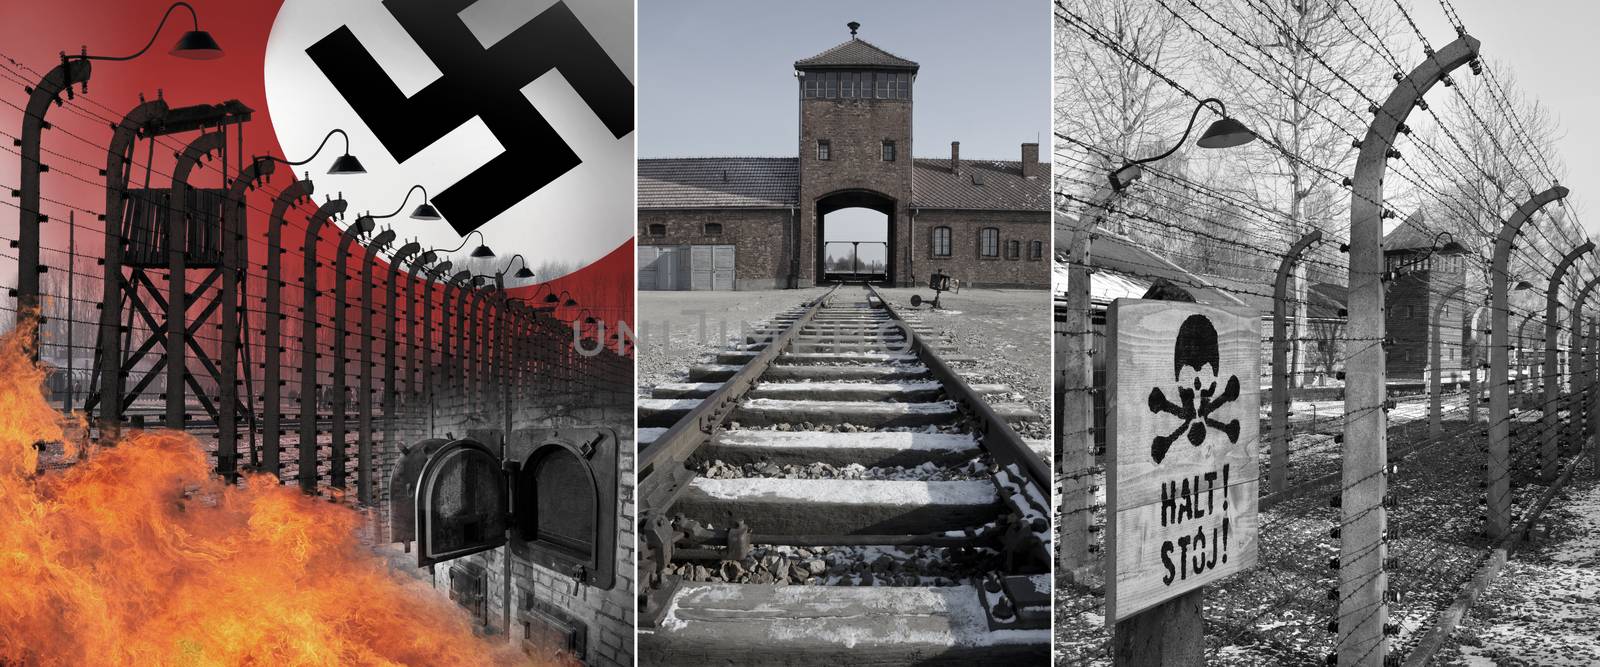 Auschwitz Concentration Camp, where up to three million people were murdered by the Nazis (2.5 million gassed, and 500,000 from disease and starvation).